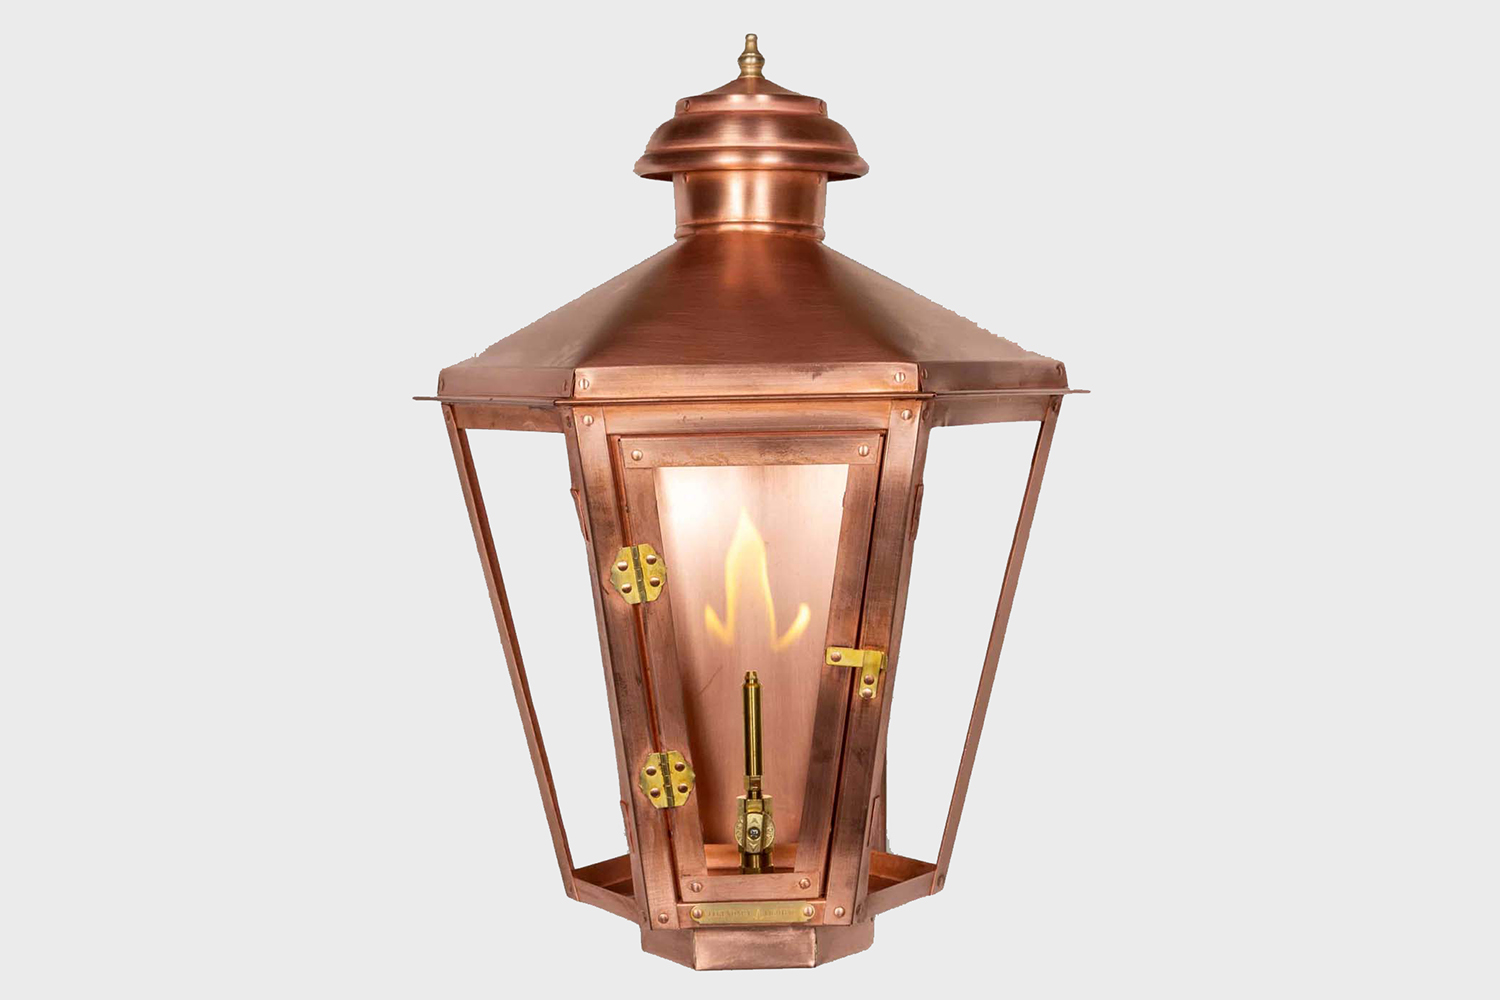 THE ATHENA copper gas light from american gas lamps